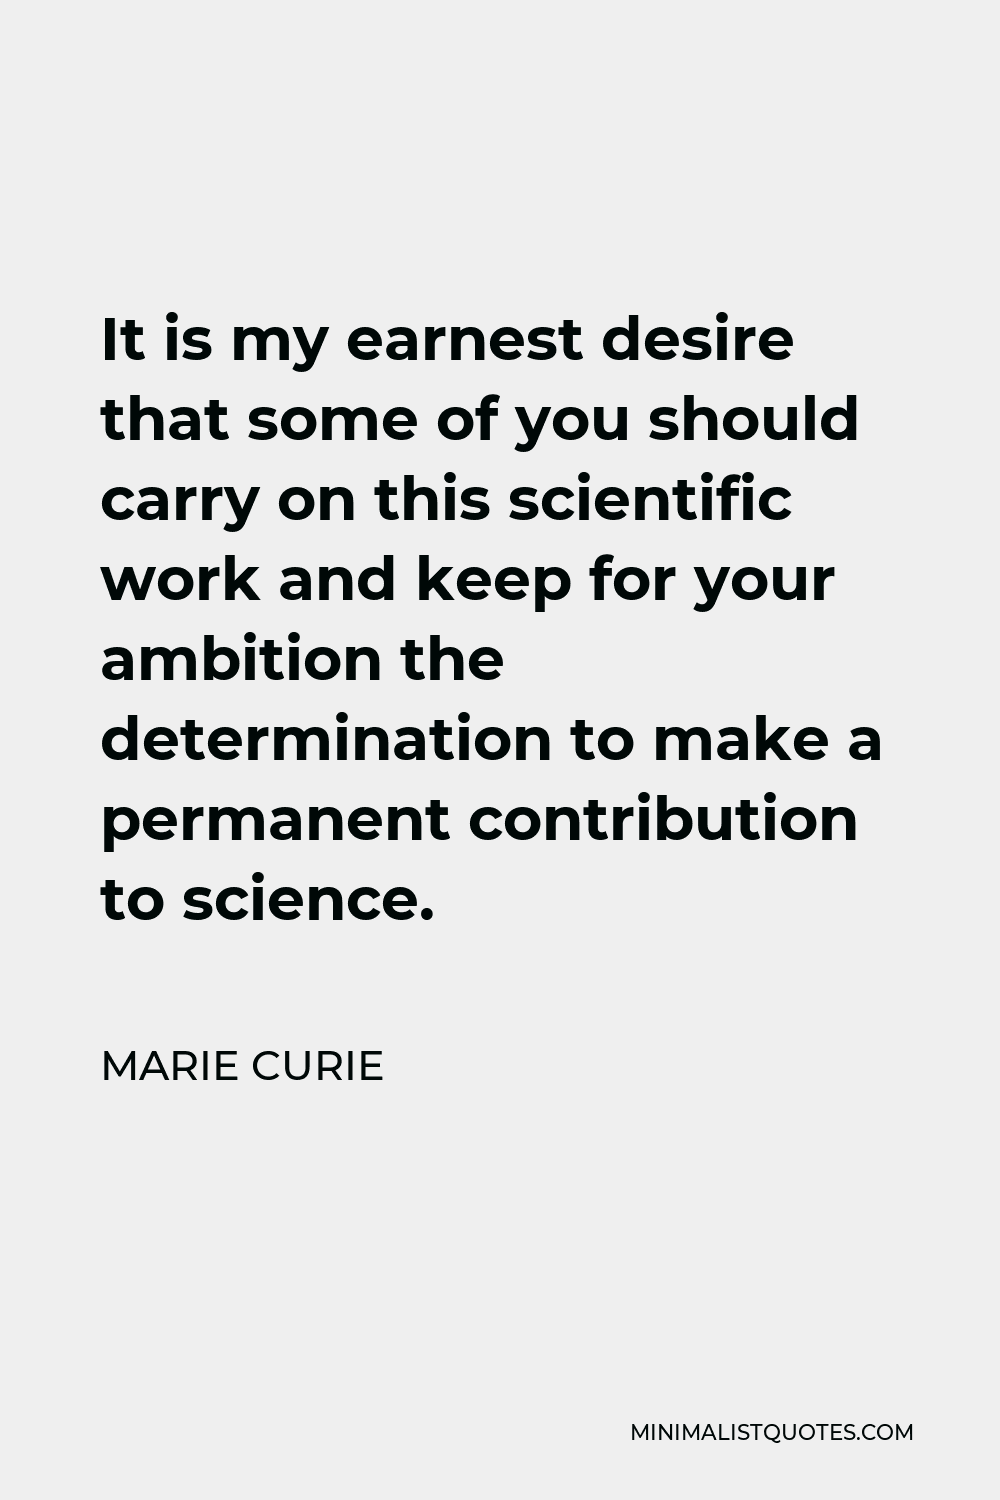 Marie Curie Quote - It is my earnest desire that some of you should carry on this scientific work and keep for your ambition the determination to make a permanent contribution to science.